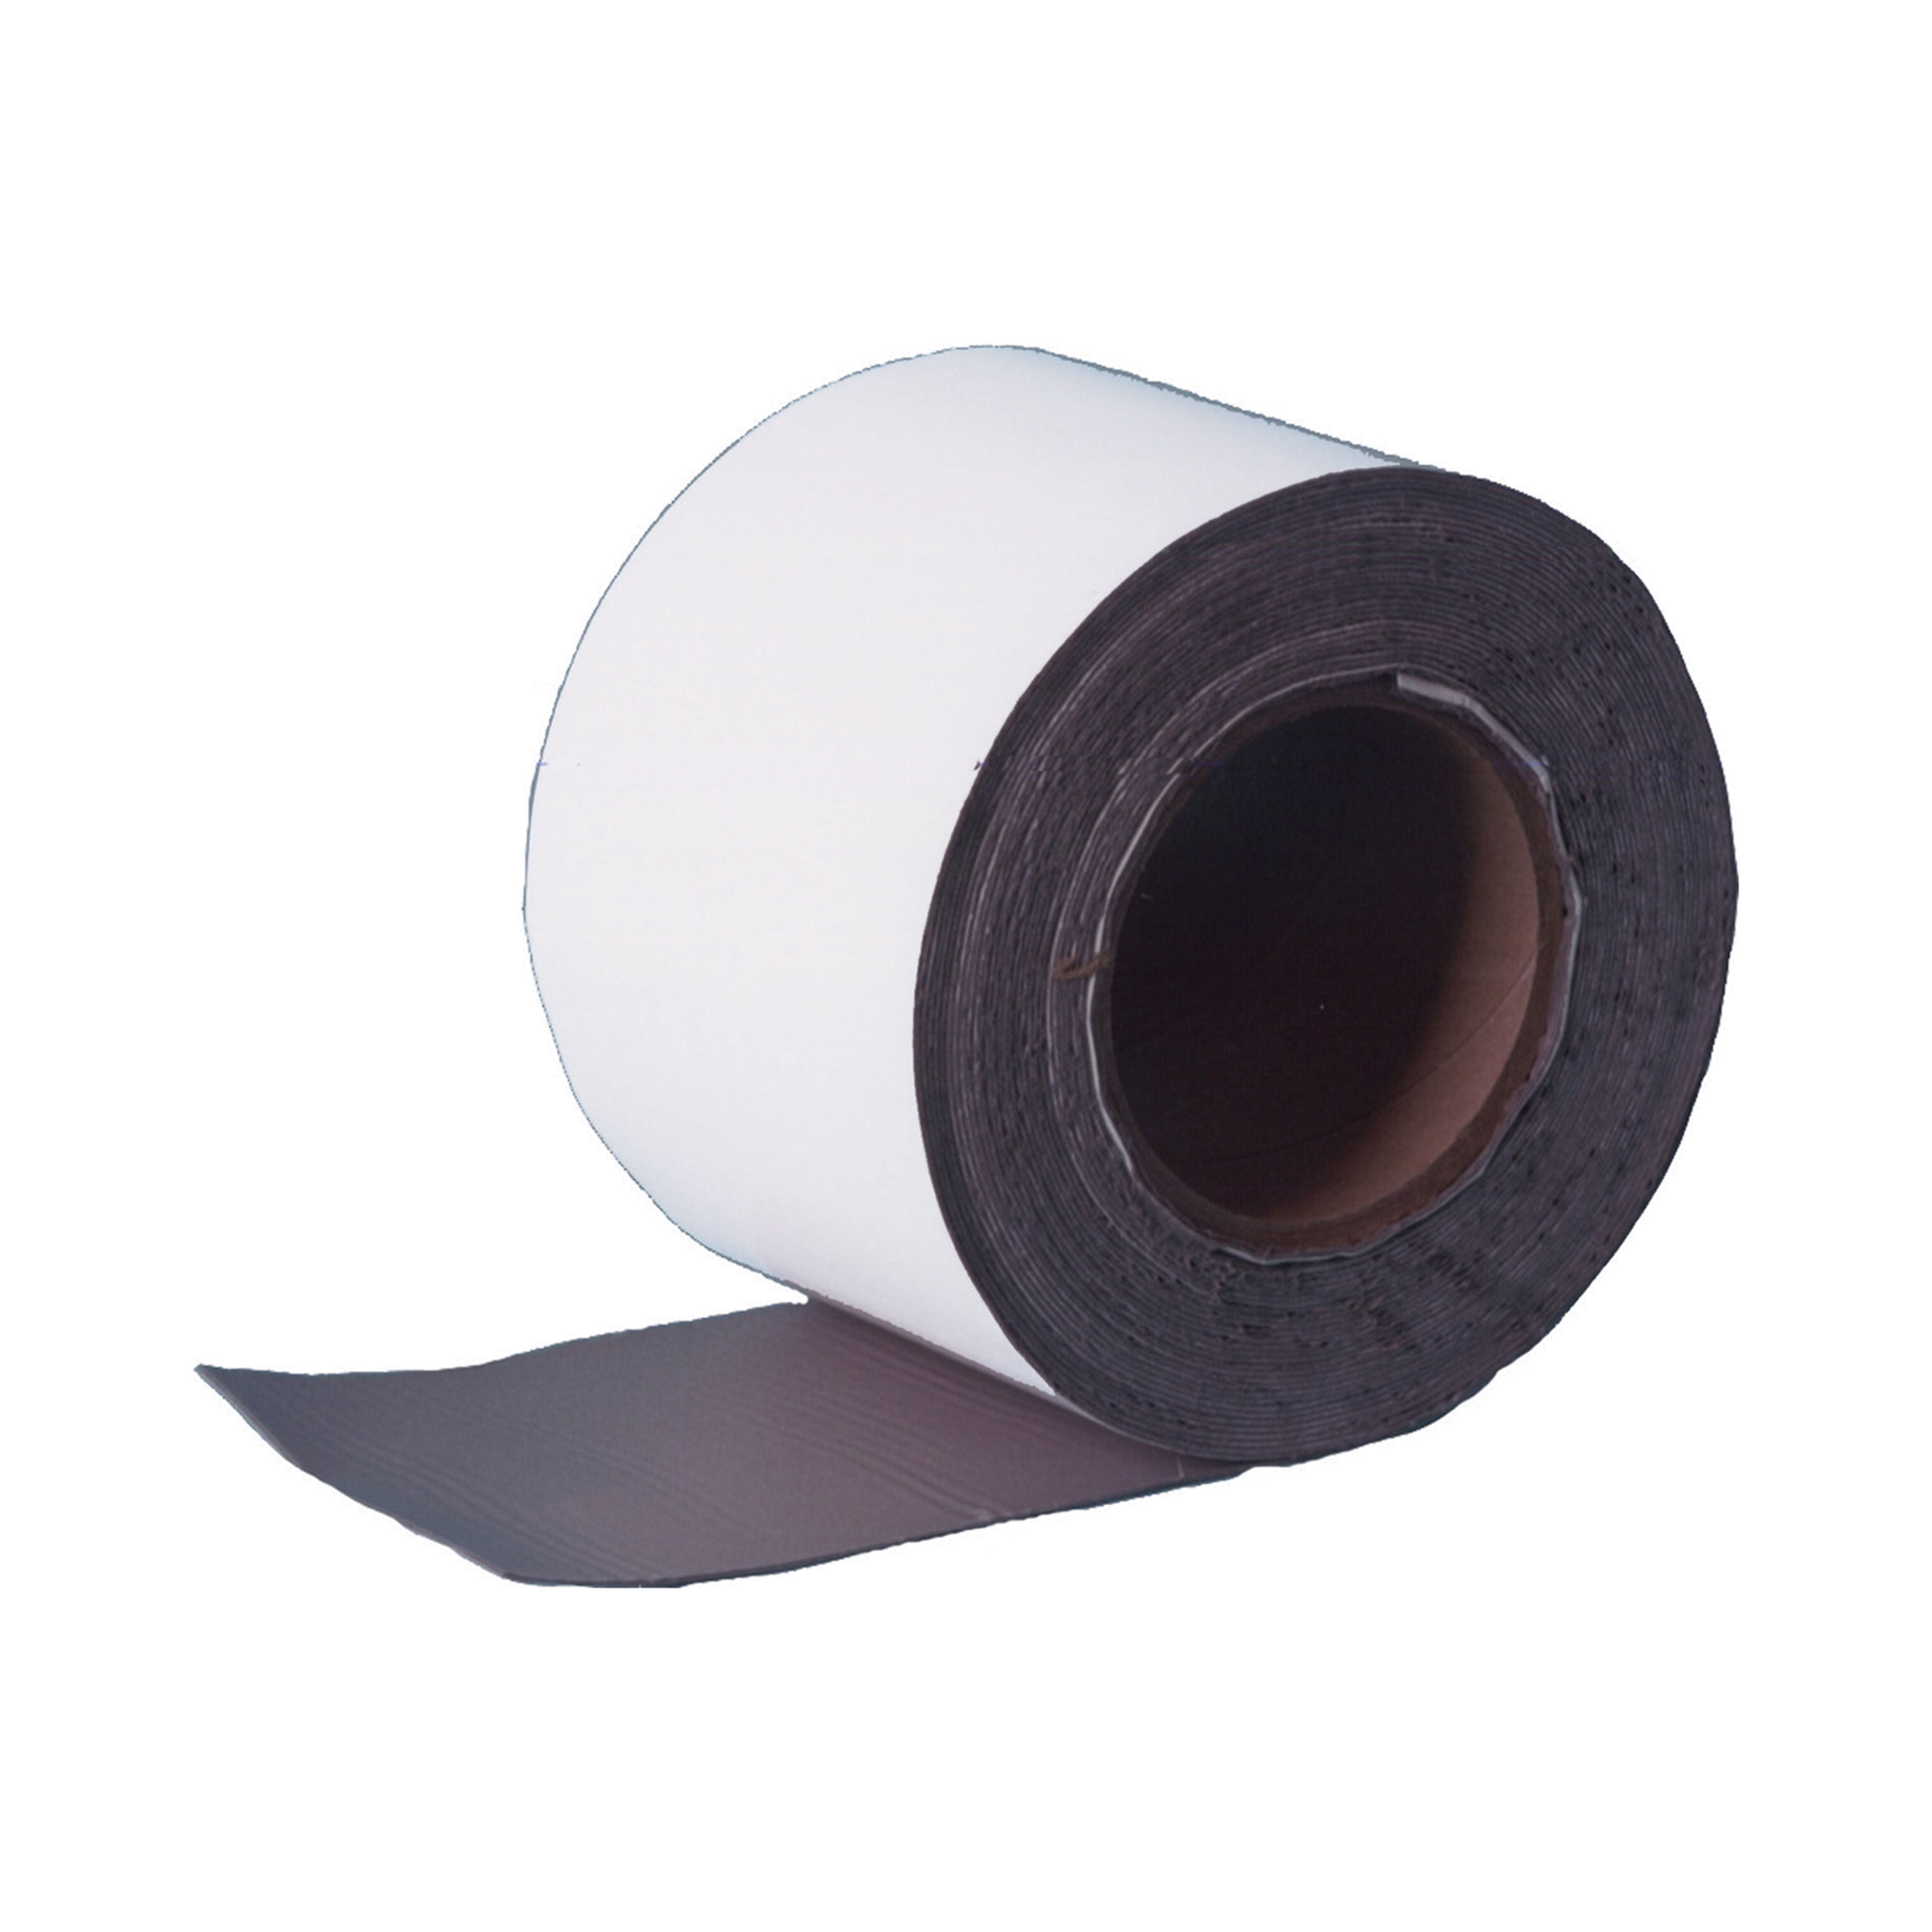 Details about   Eternabond RV Rubber Roof Repair Tape 4" x 5' White with free roller 